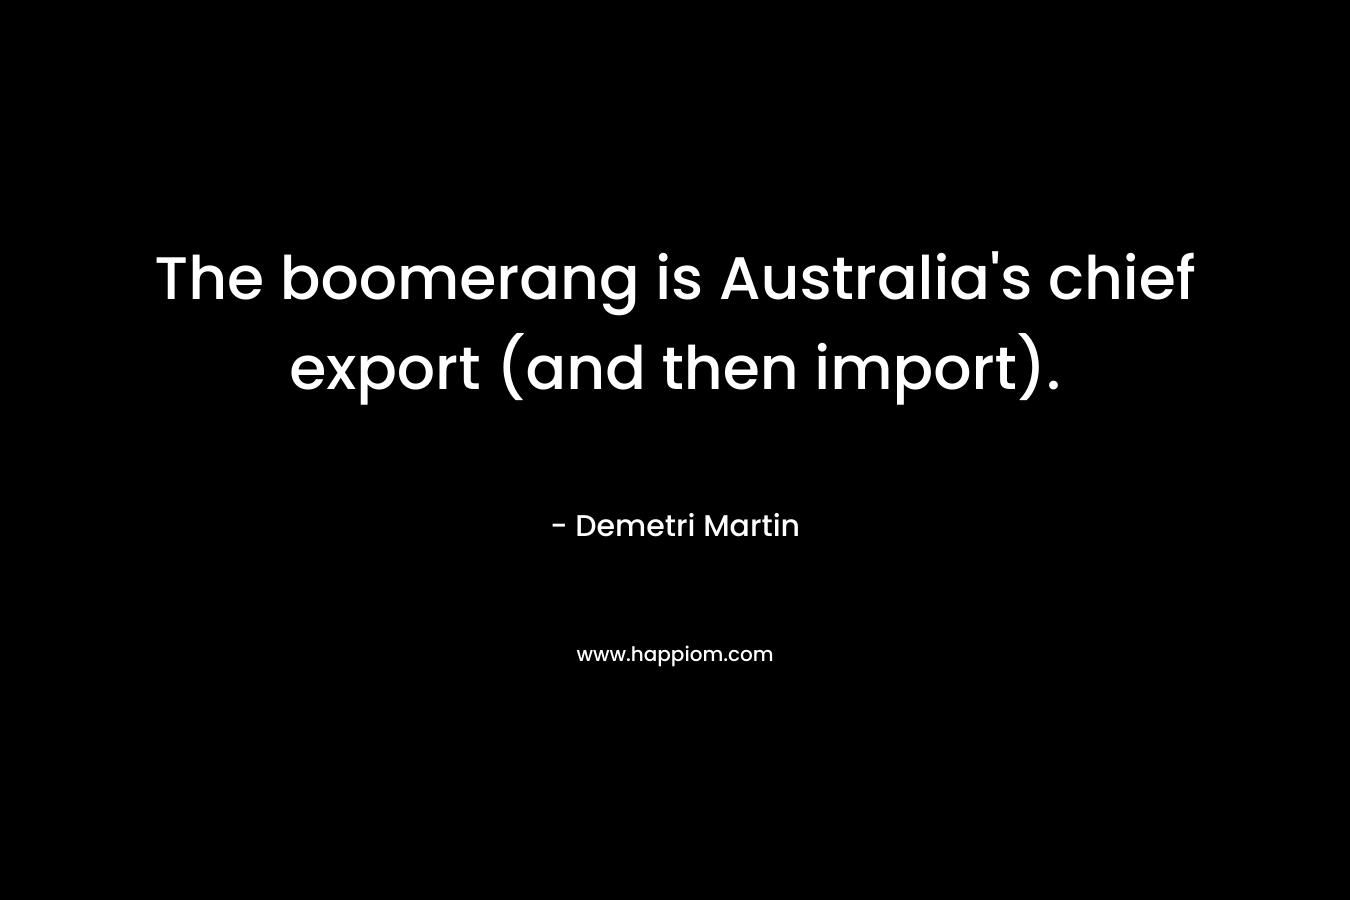 The boomerang is Australia’s chief export (and then import). – Demetri Martin